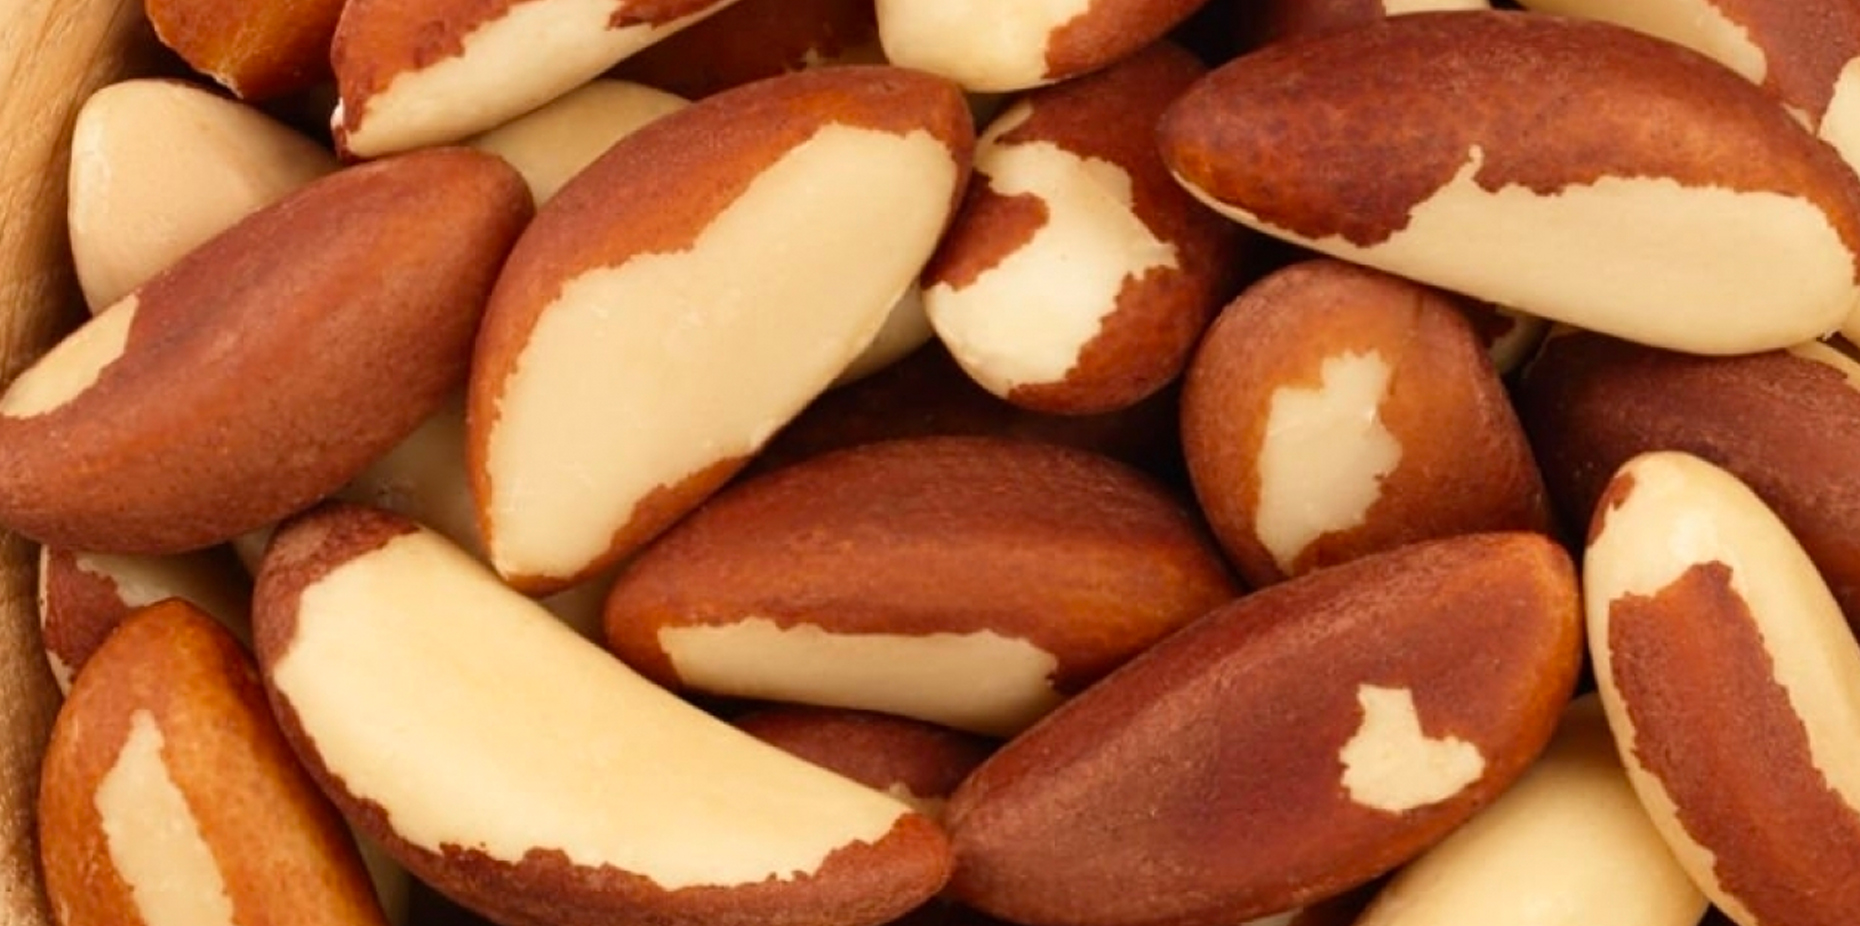 10 Proven Health Benefits of Brazil Nuts